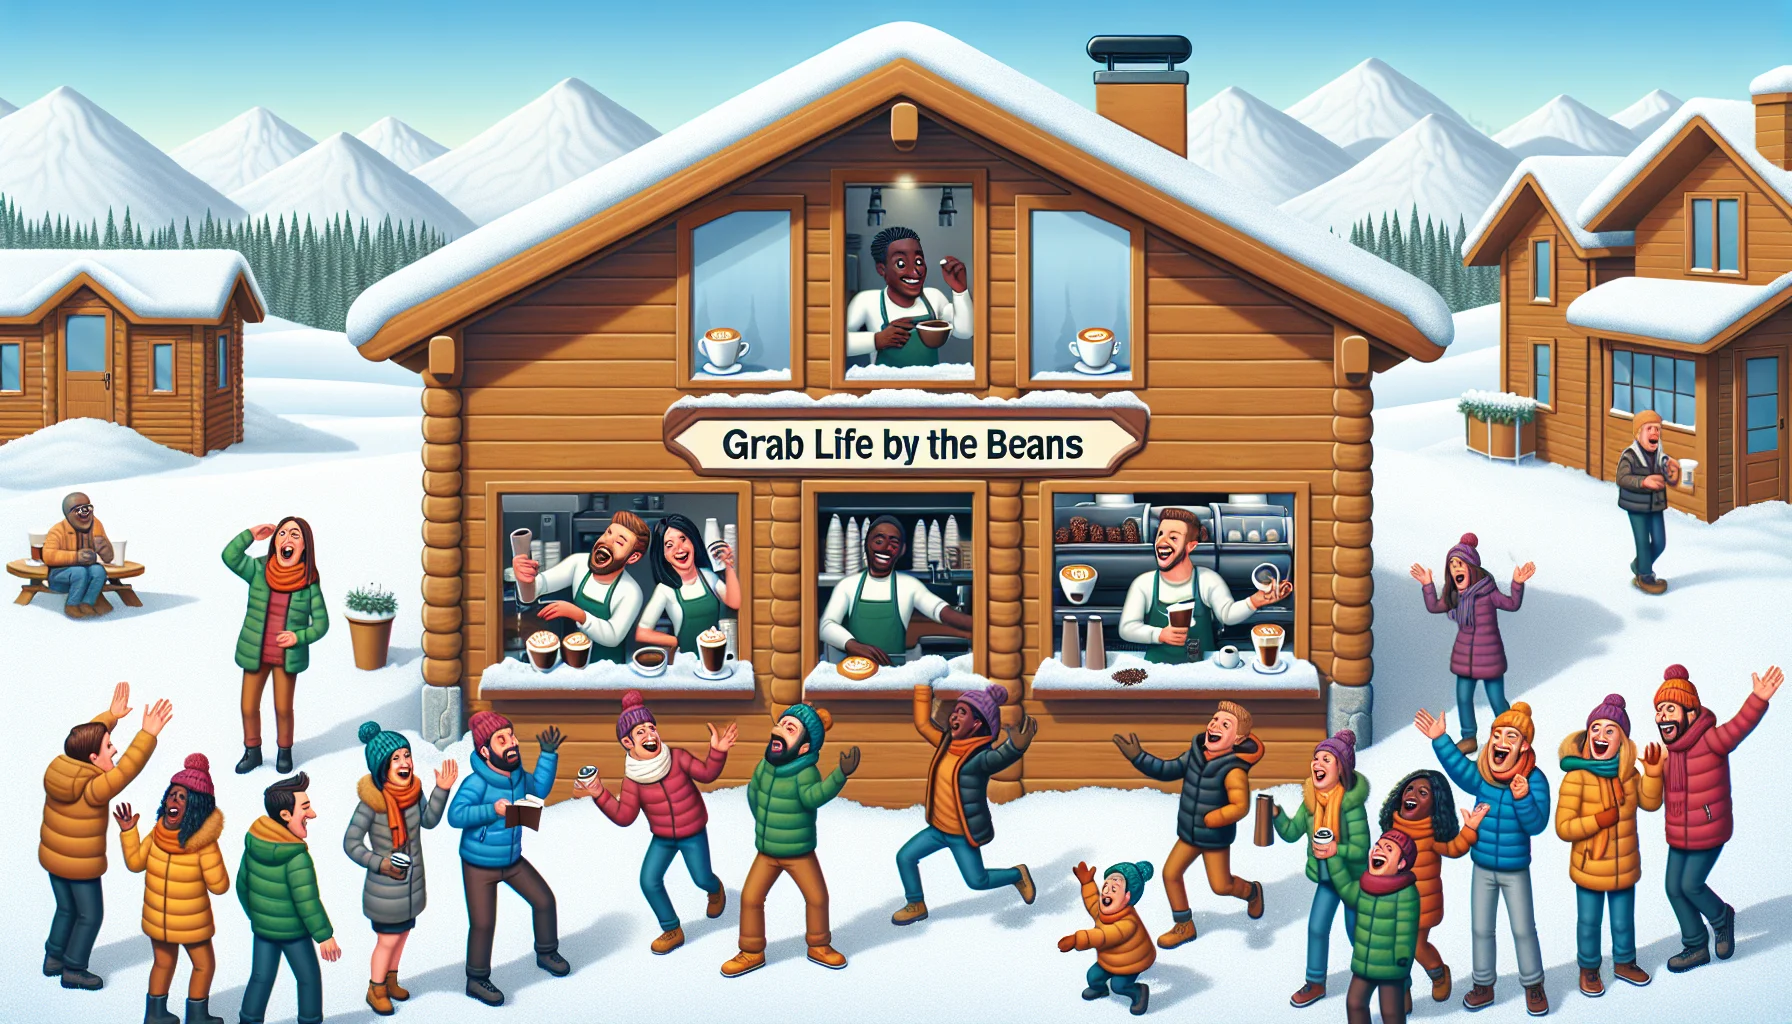 Create an engaging and humorous scene at an espresso chalet. Picture a chalet tucked in the midst of a snowy landscape, with large windows revealing the interior. Inside, four baristas with different descents are bustling about: a Caucasian male vying to make the perfect froth, a Black female showing off a latte art, a Hispanic male juggling espresso cups, and a South Asian female laughing while taking orders. The sign outside the chalet humorously reads 'Grab life by the beans'. A crowd of excited people of different genders and descents is waiting in line in the snow, cheerfully laughing at the sign and the antics of the baristas.